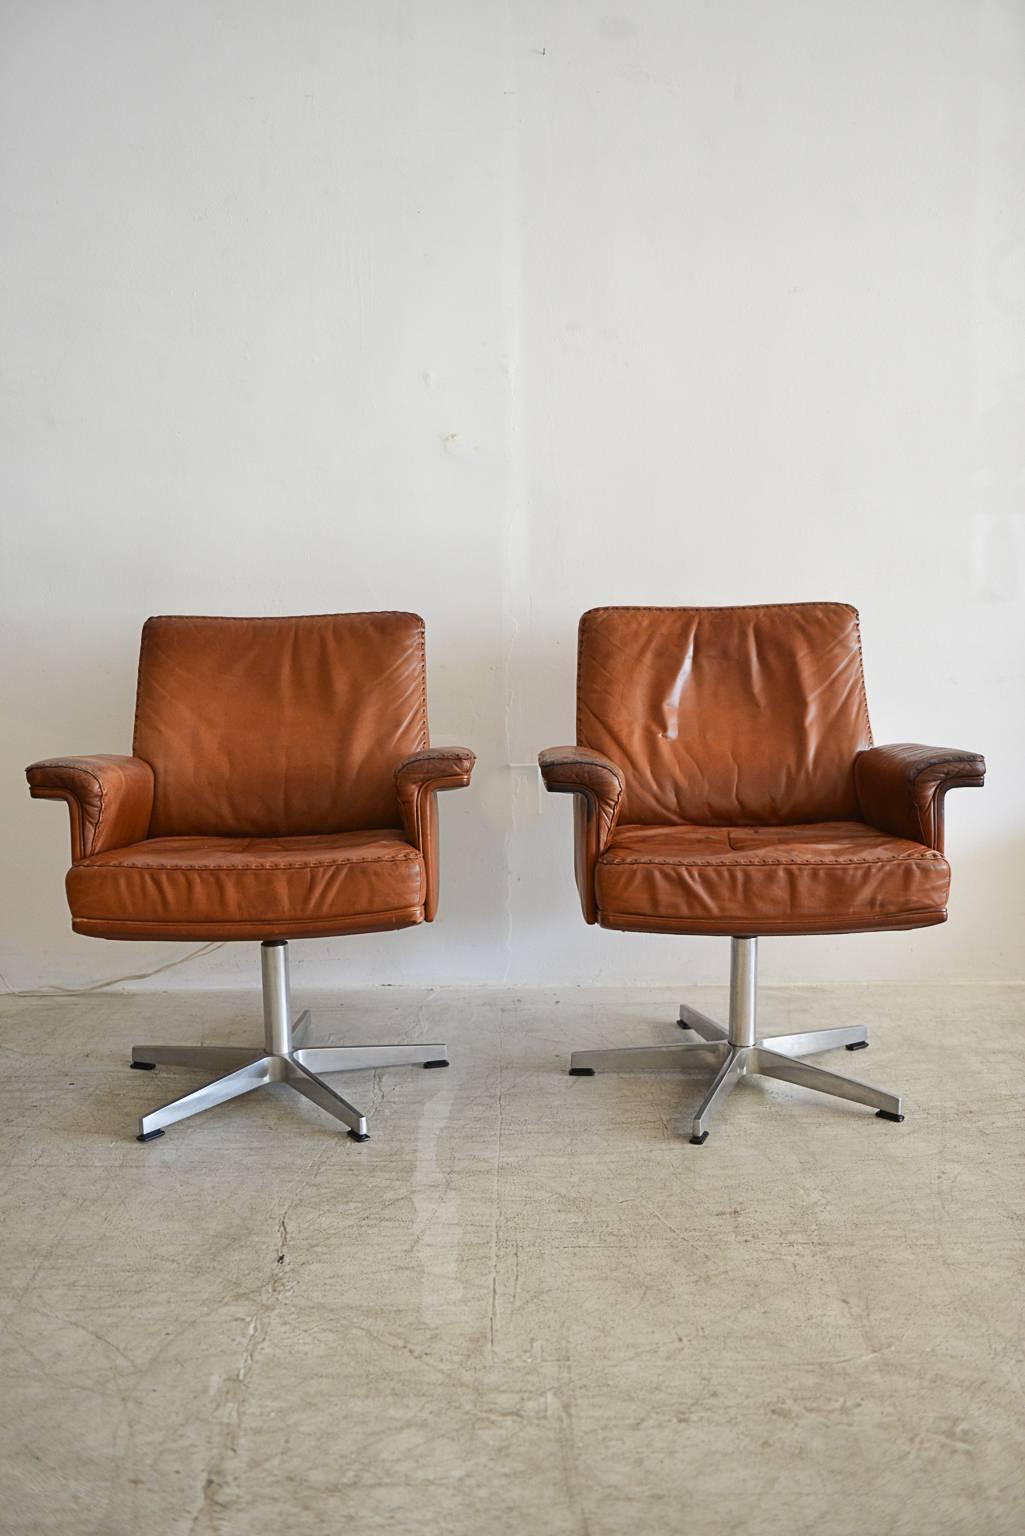 Luxurious saddle brown leather stitched swivel armchairs by Swiss manufacturer De Sede. Wonderful, rich patina to the leather, in very good condition, in as found condition from the 1960s.

Swivels are stabile, no sticking or extra play and the